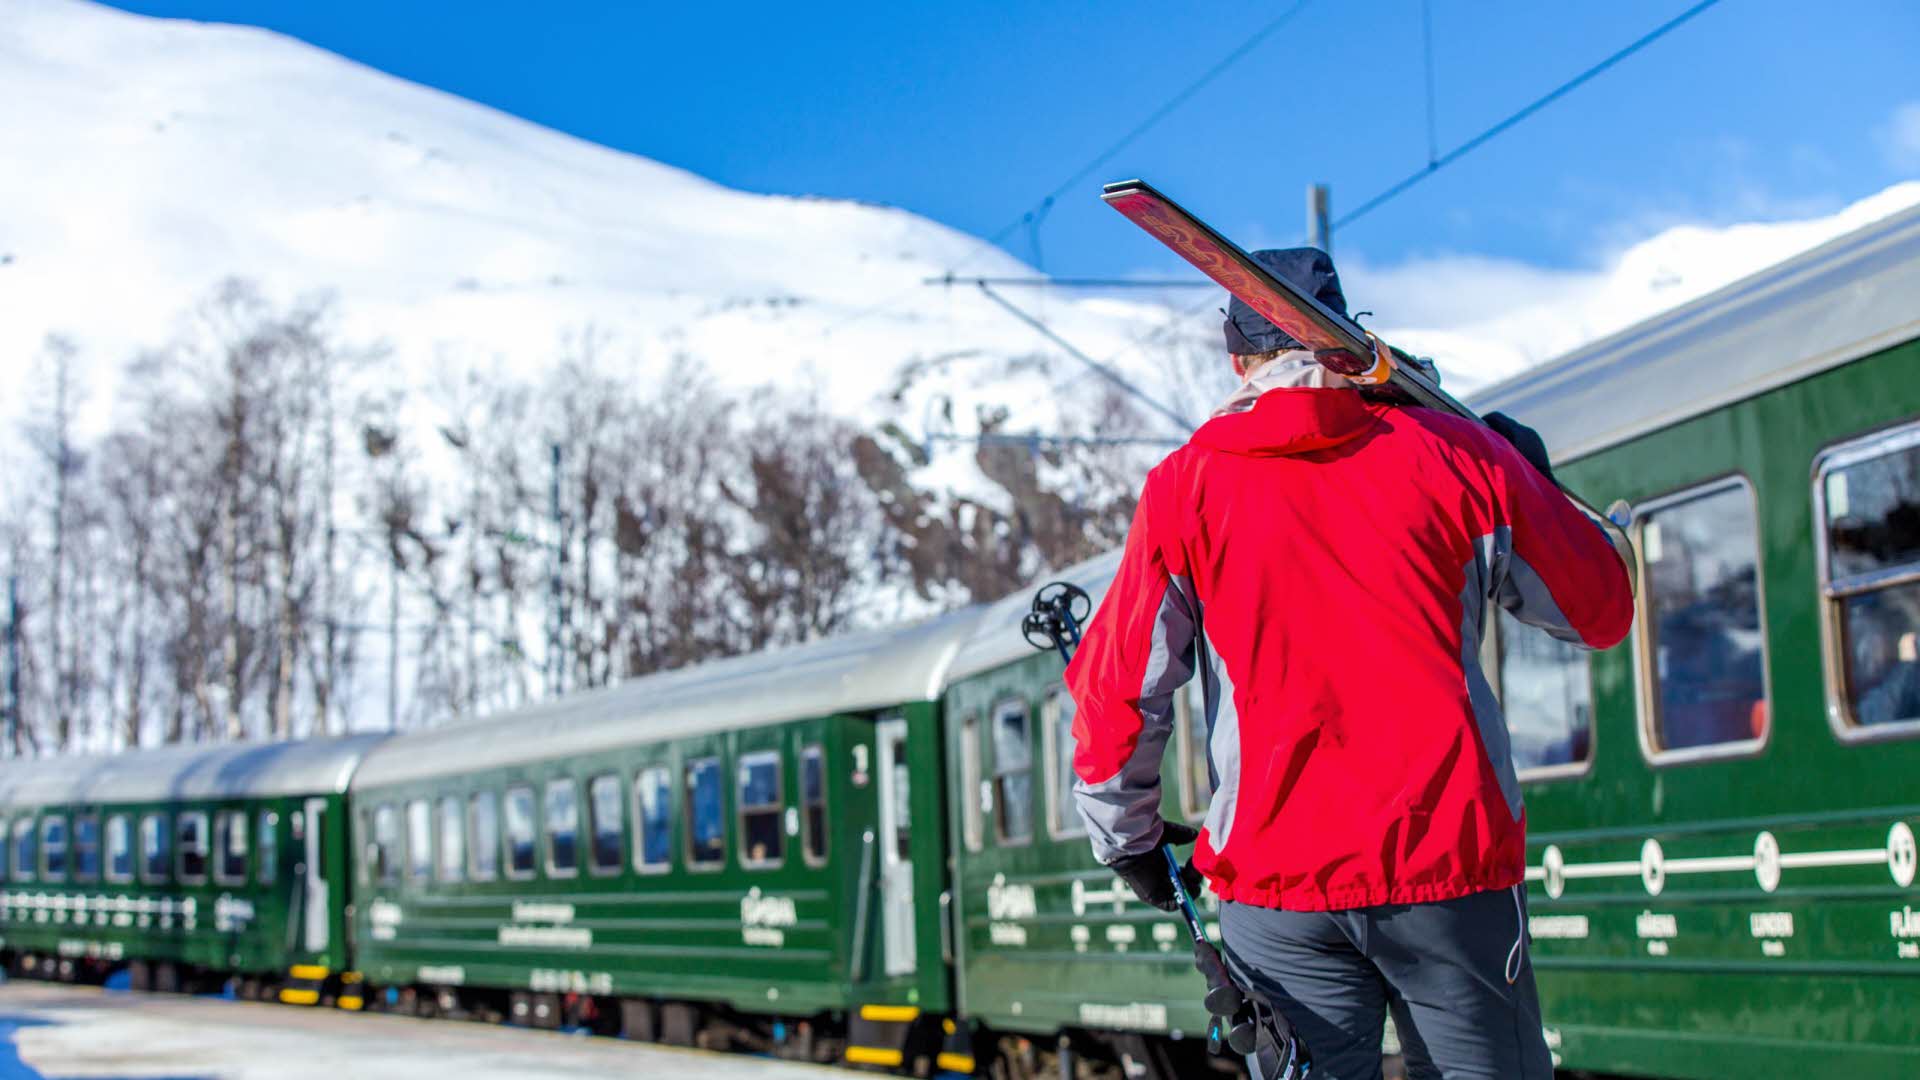 A man carrying skis on his shoulders by the Flåm Railway. Snow-covered mountains around.